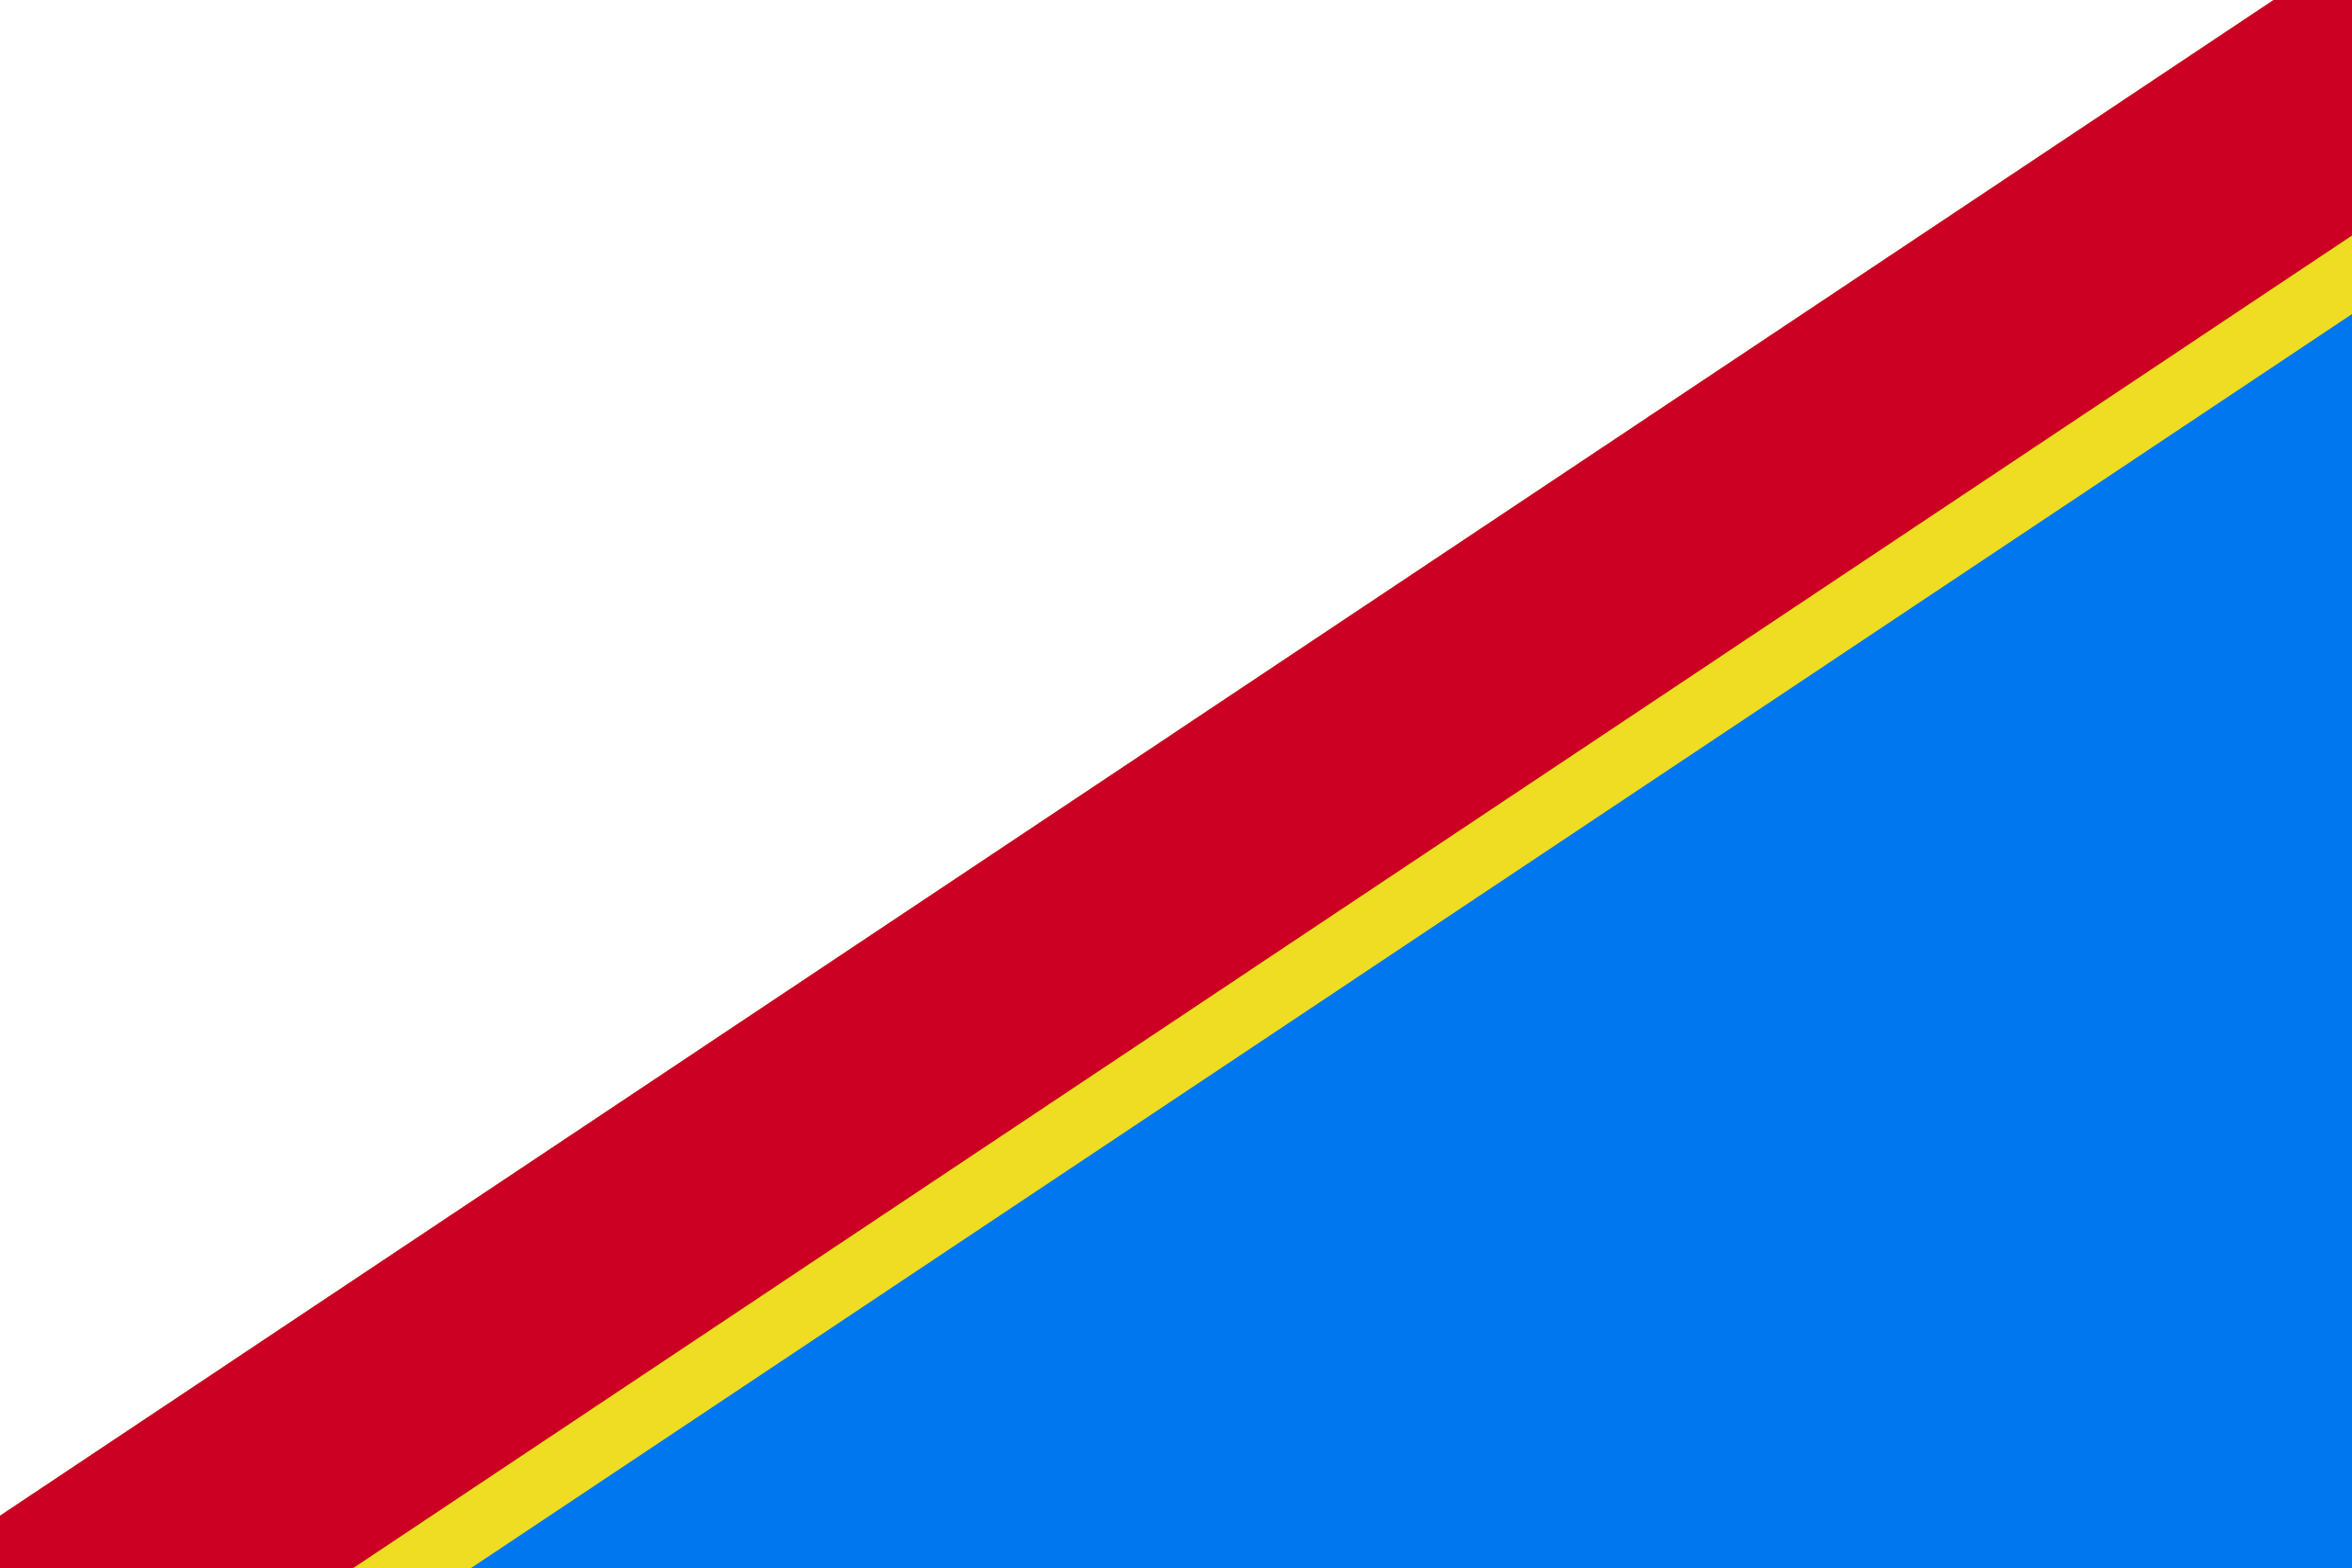 File:Flag of the Democratic Republic of the Congo.svg - Wikimedia Commons